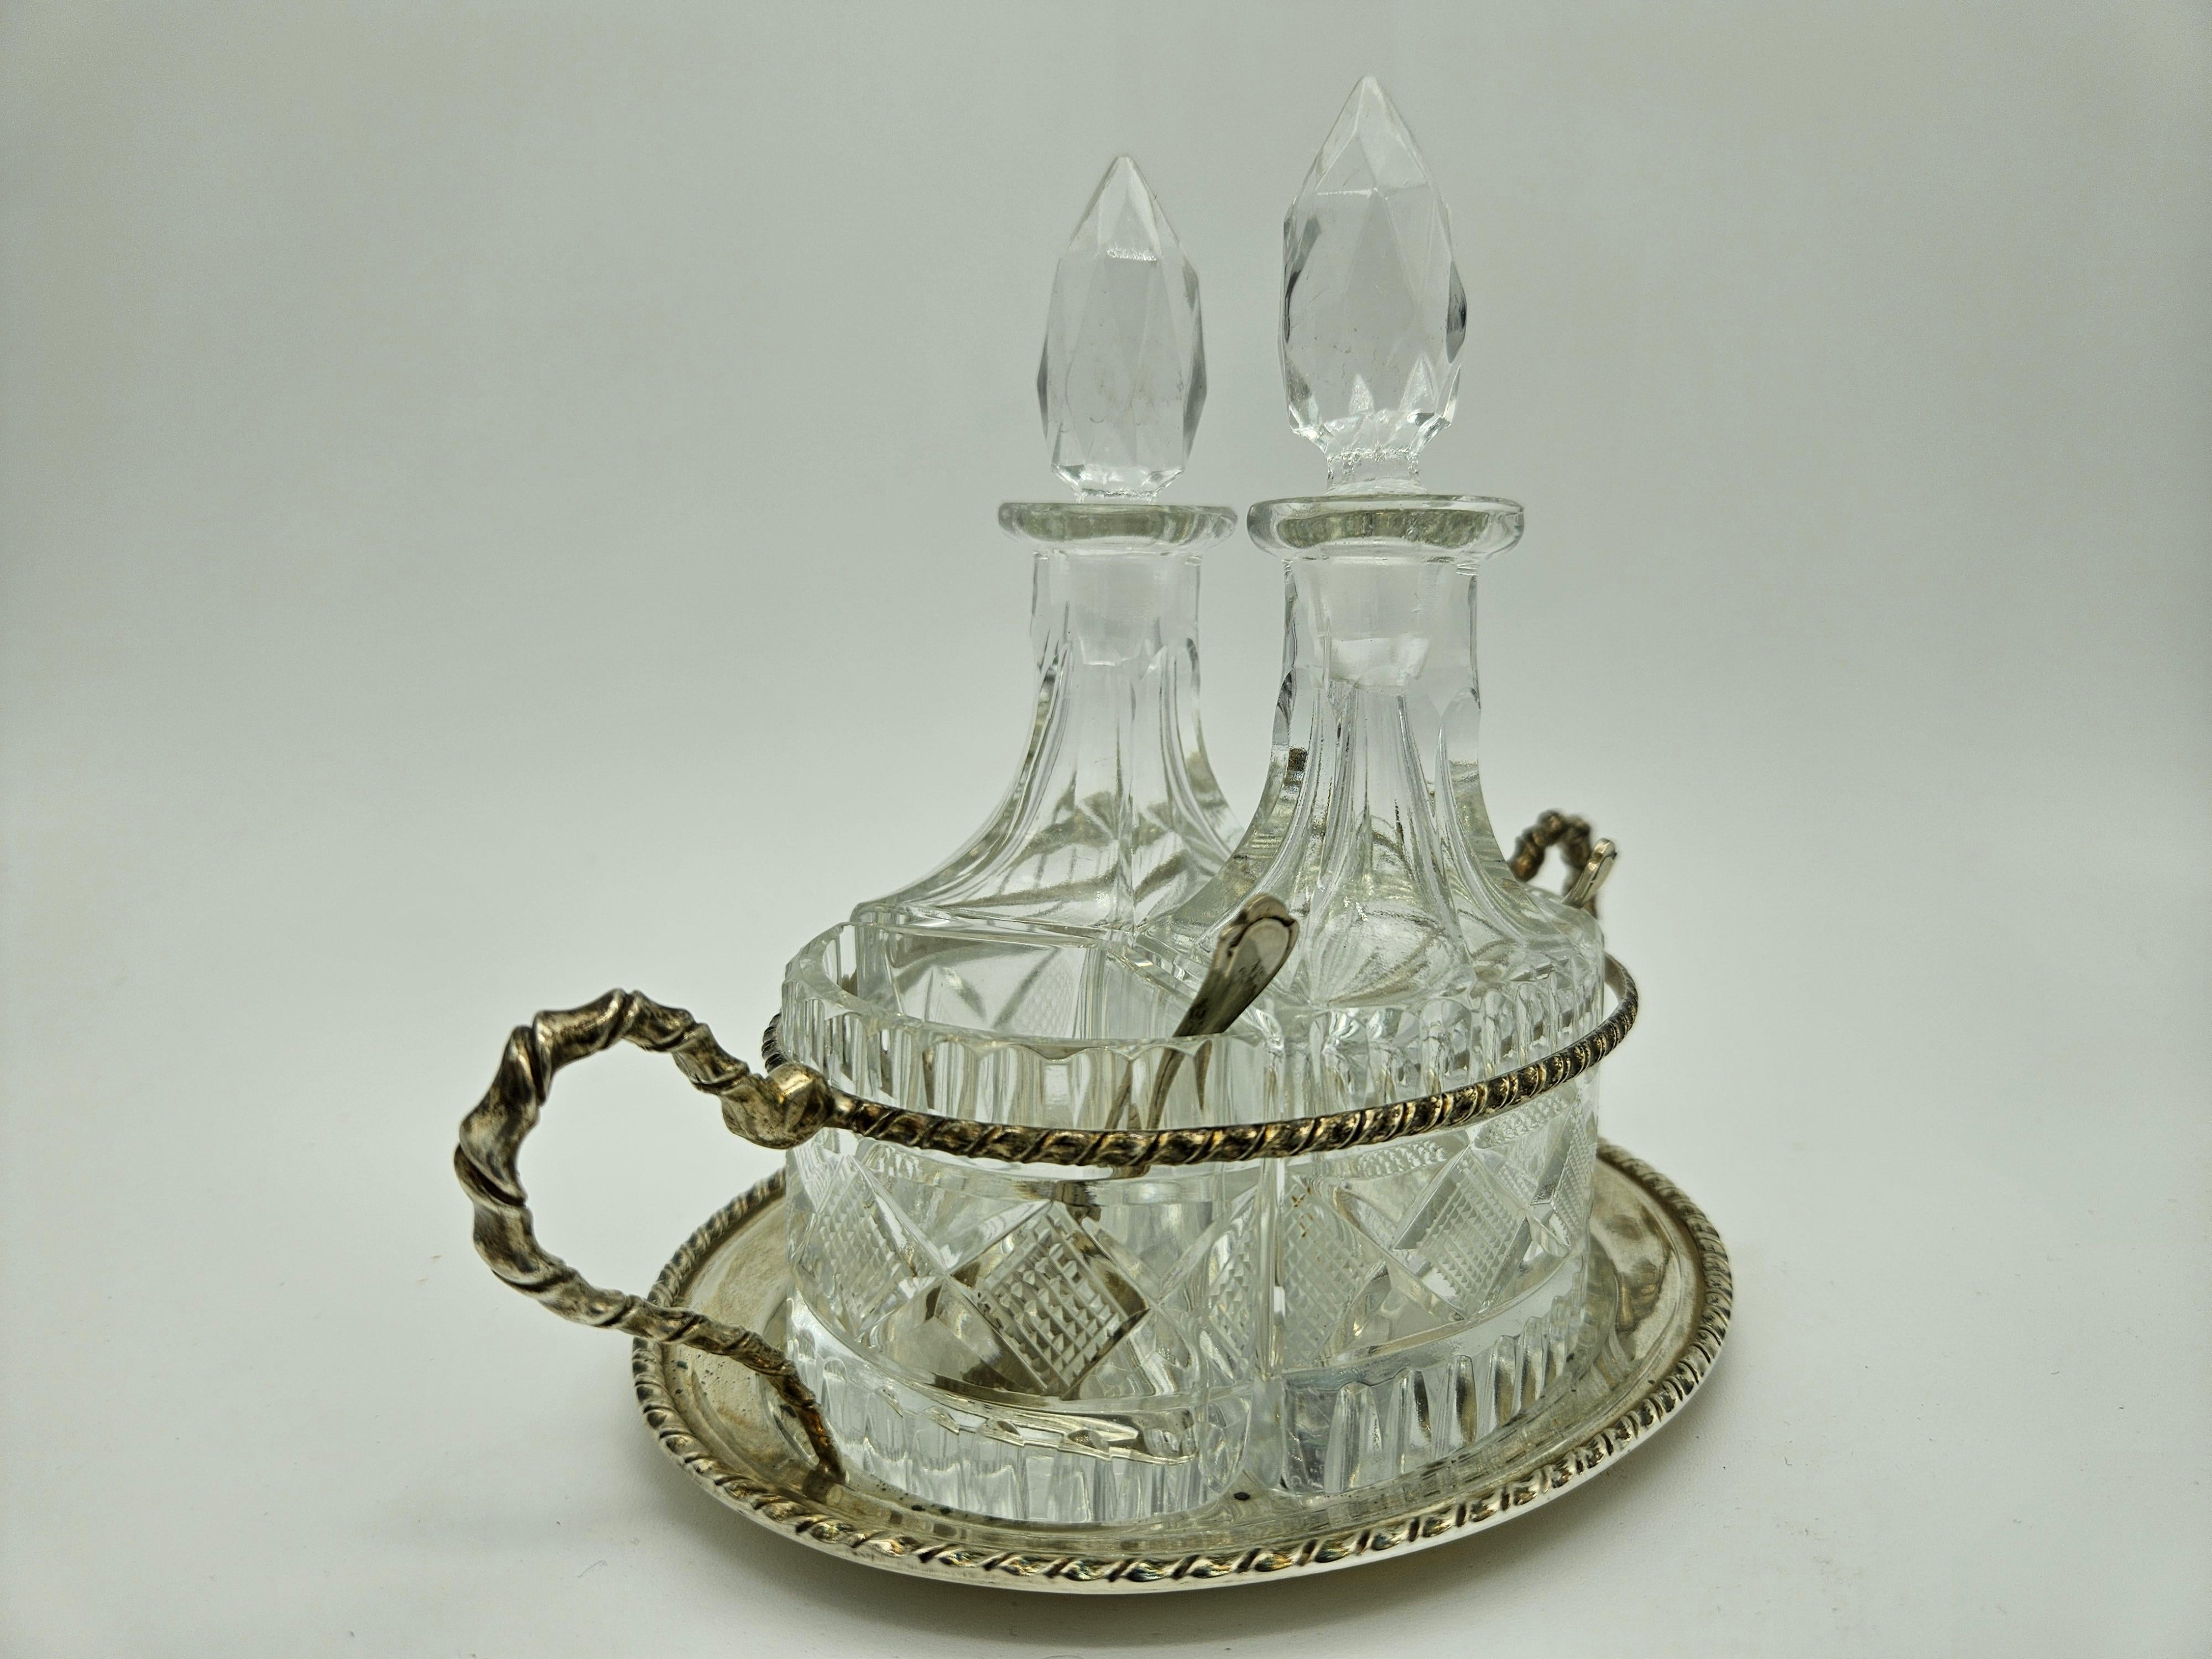 Neoclassical Revival Glass and silver oil and vinegar table set 20th century For Sale